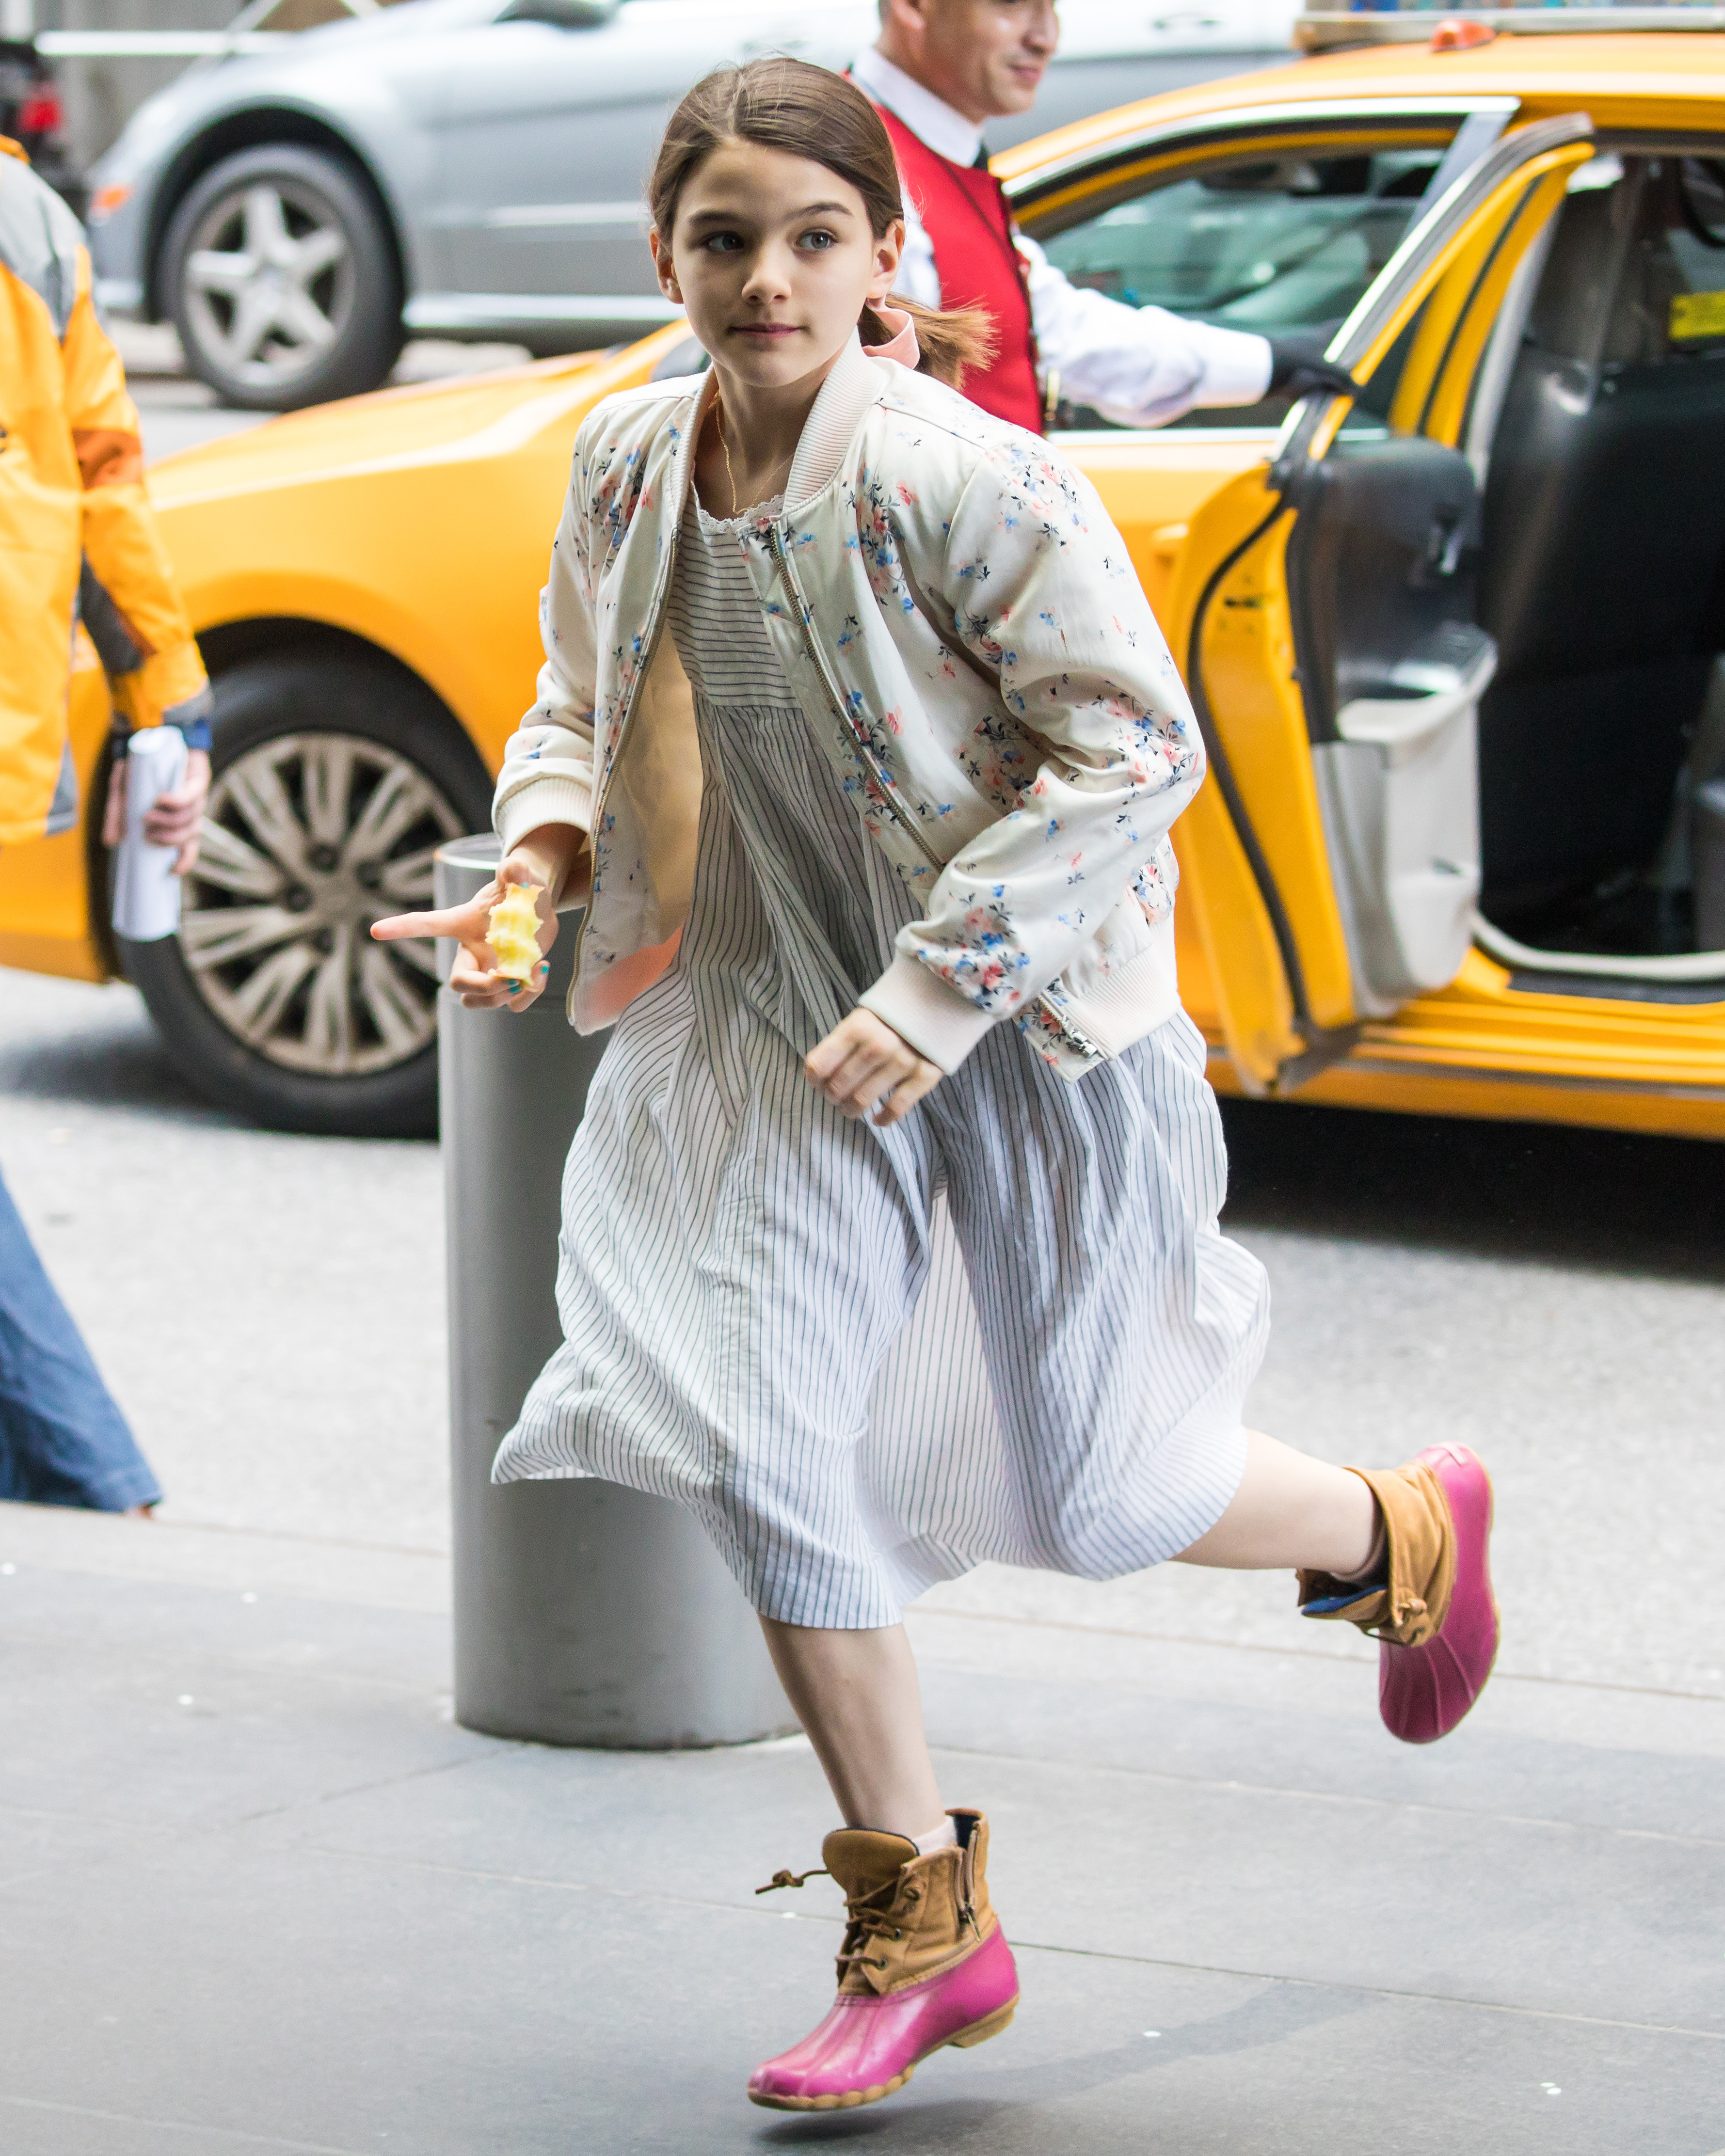 Suri Cruise is seen arriving at her hotel in New York City on April 28, 2018 | Source: Getty Images